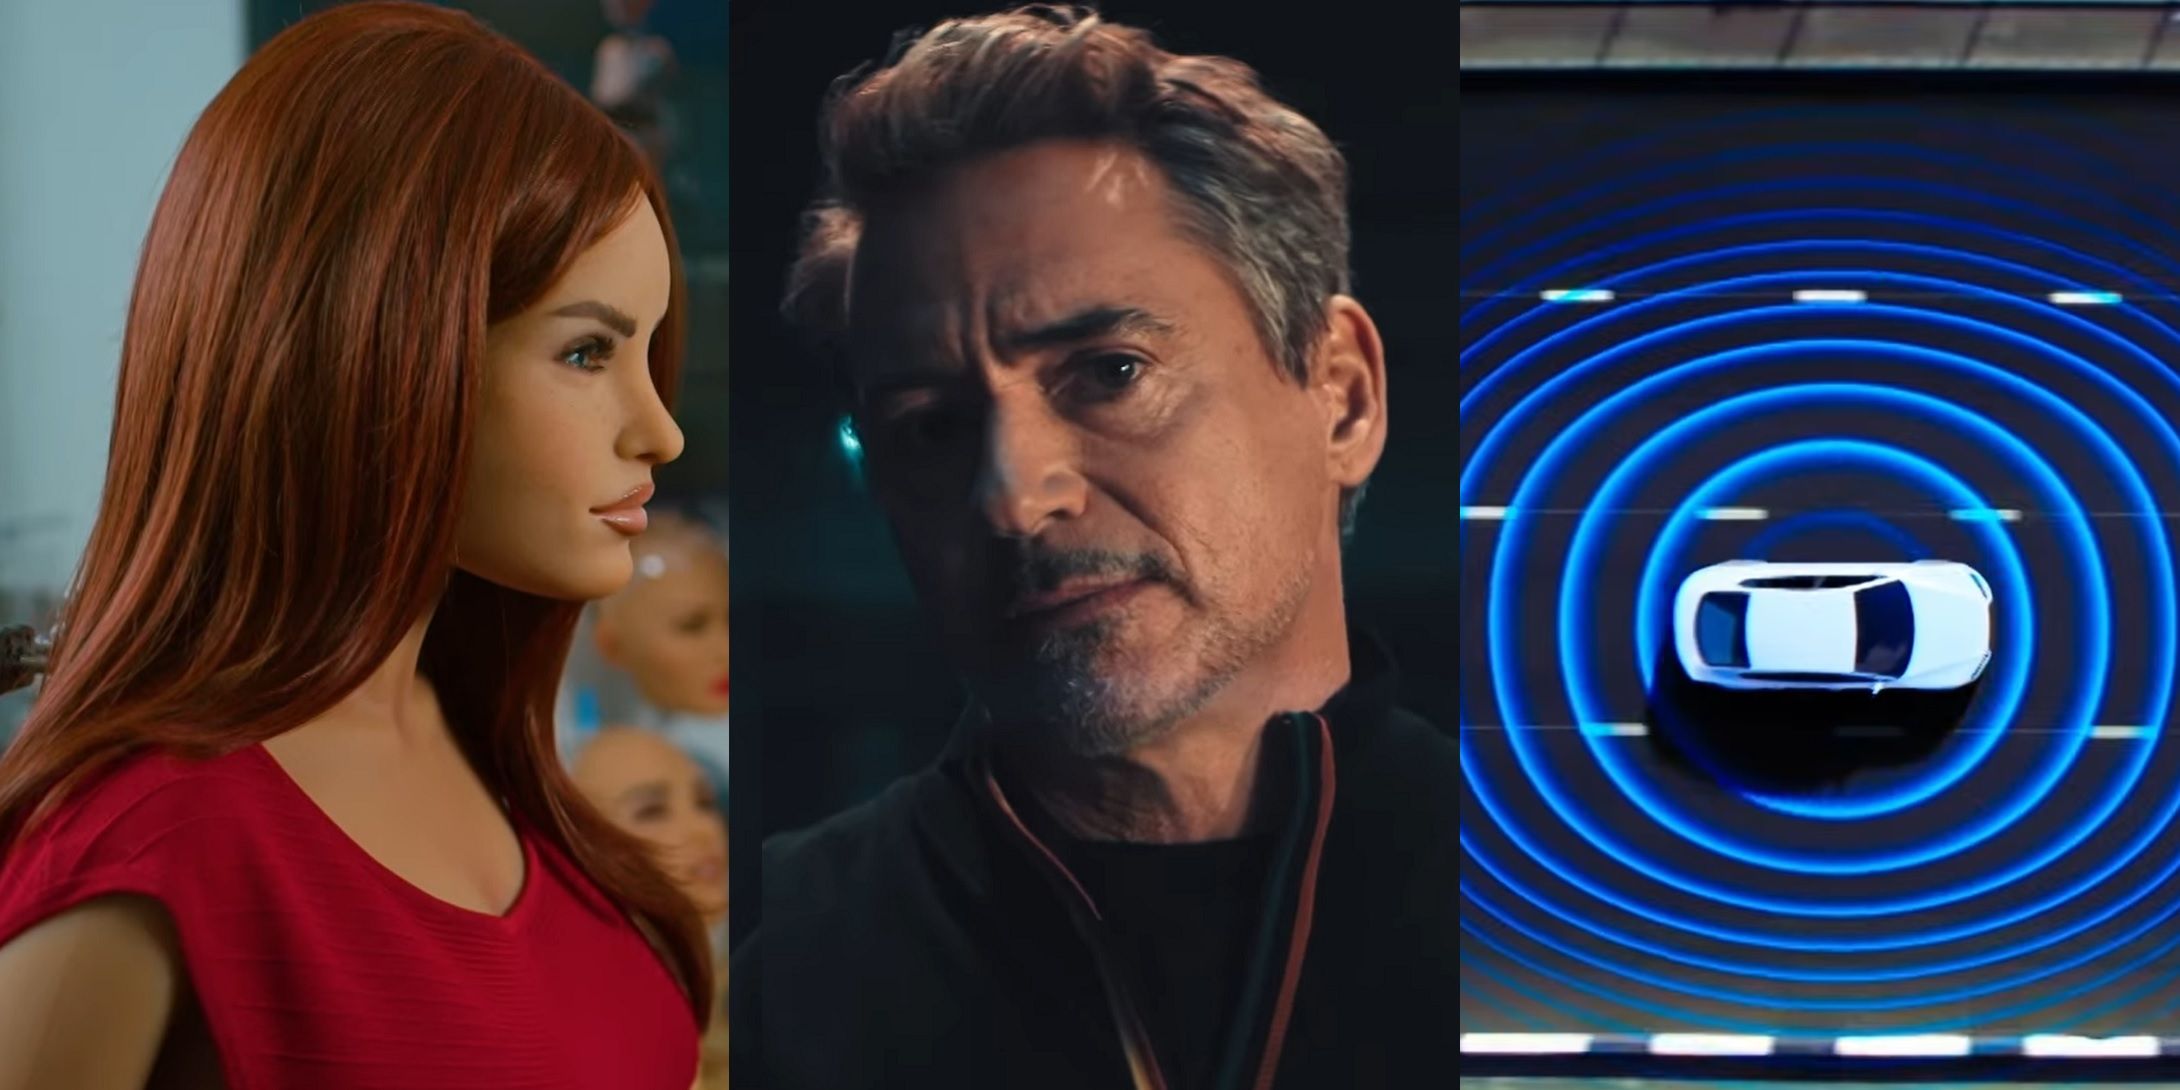 YouTube The Age of AI with Robert Downey Jr.